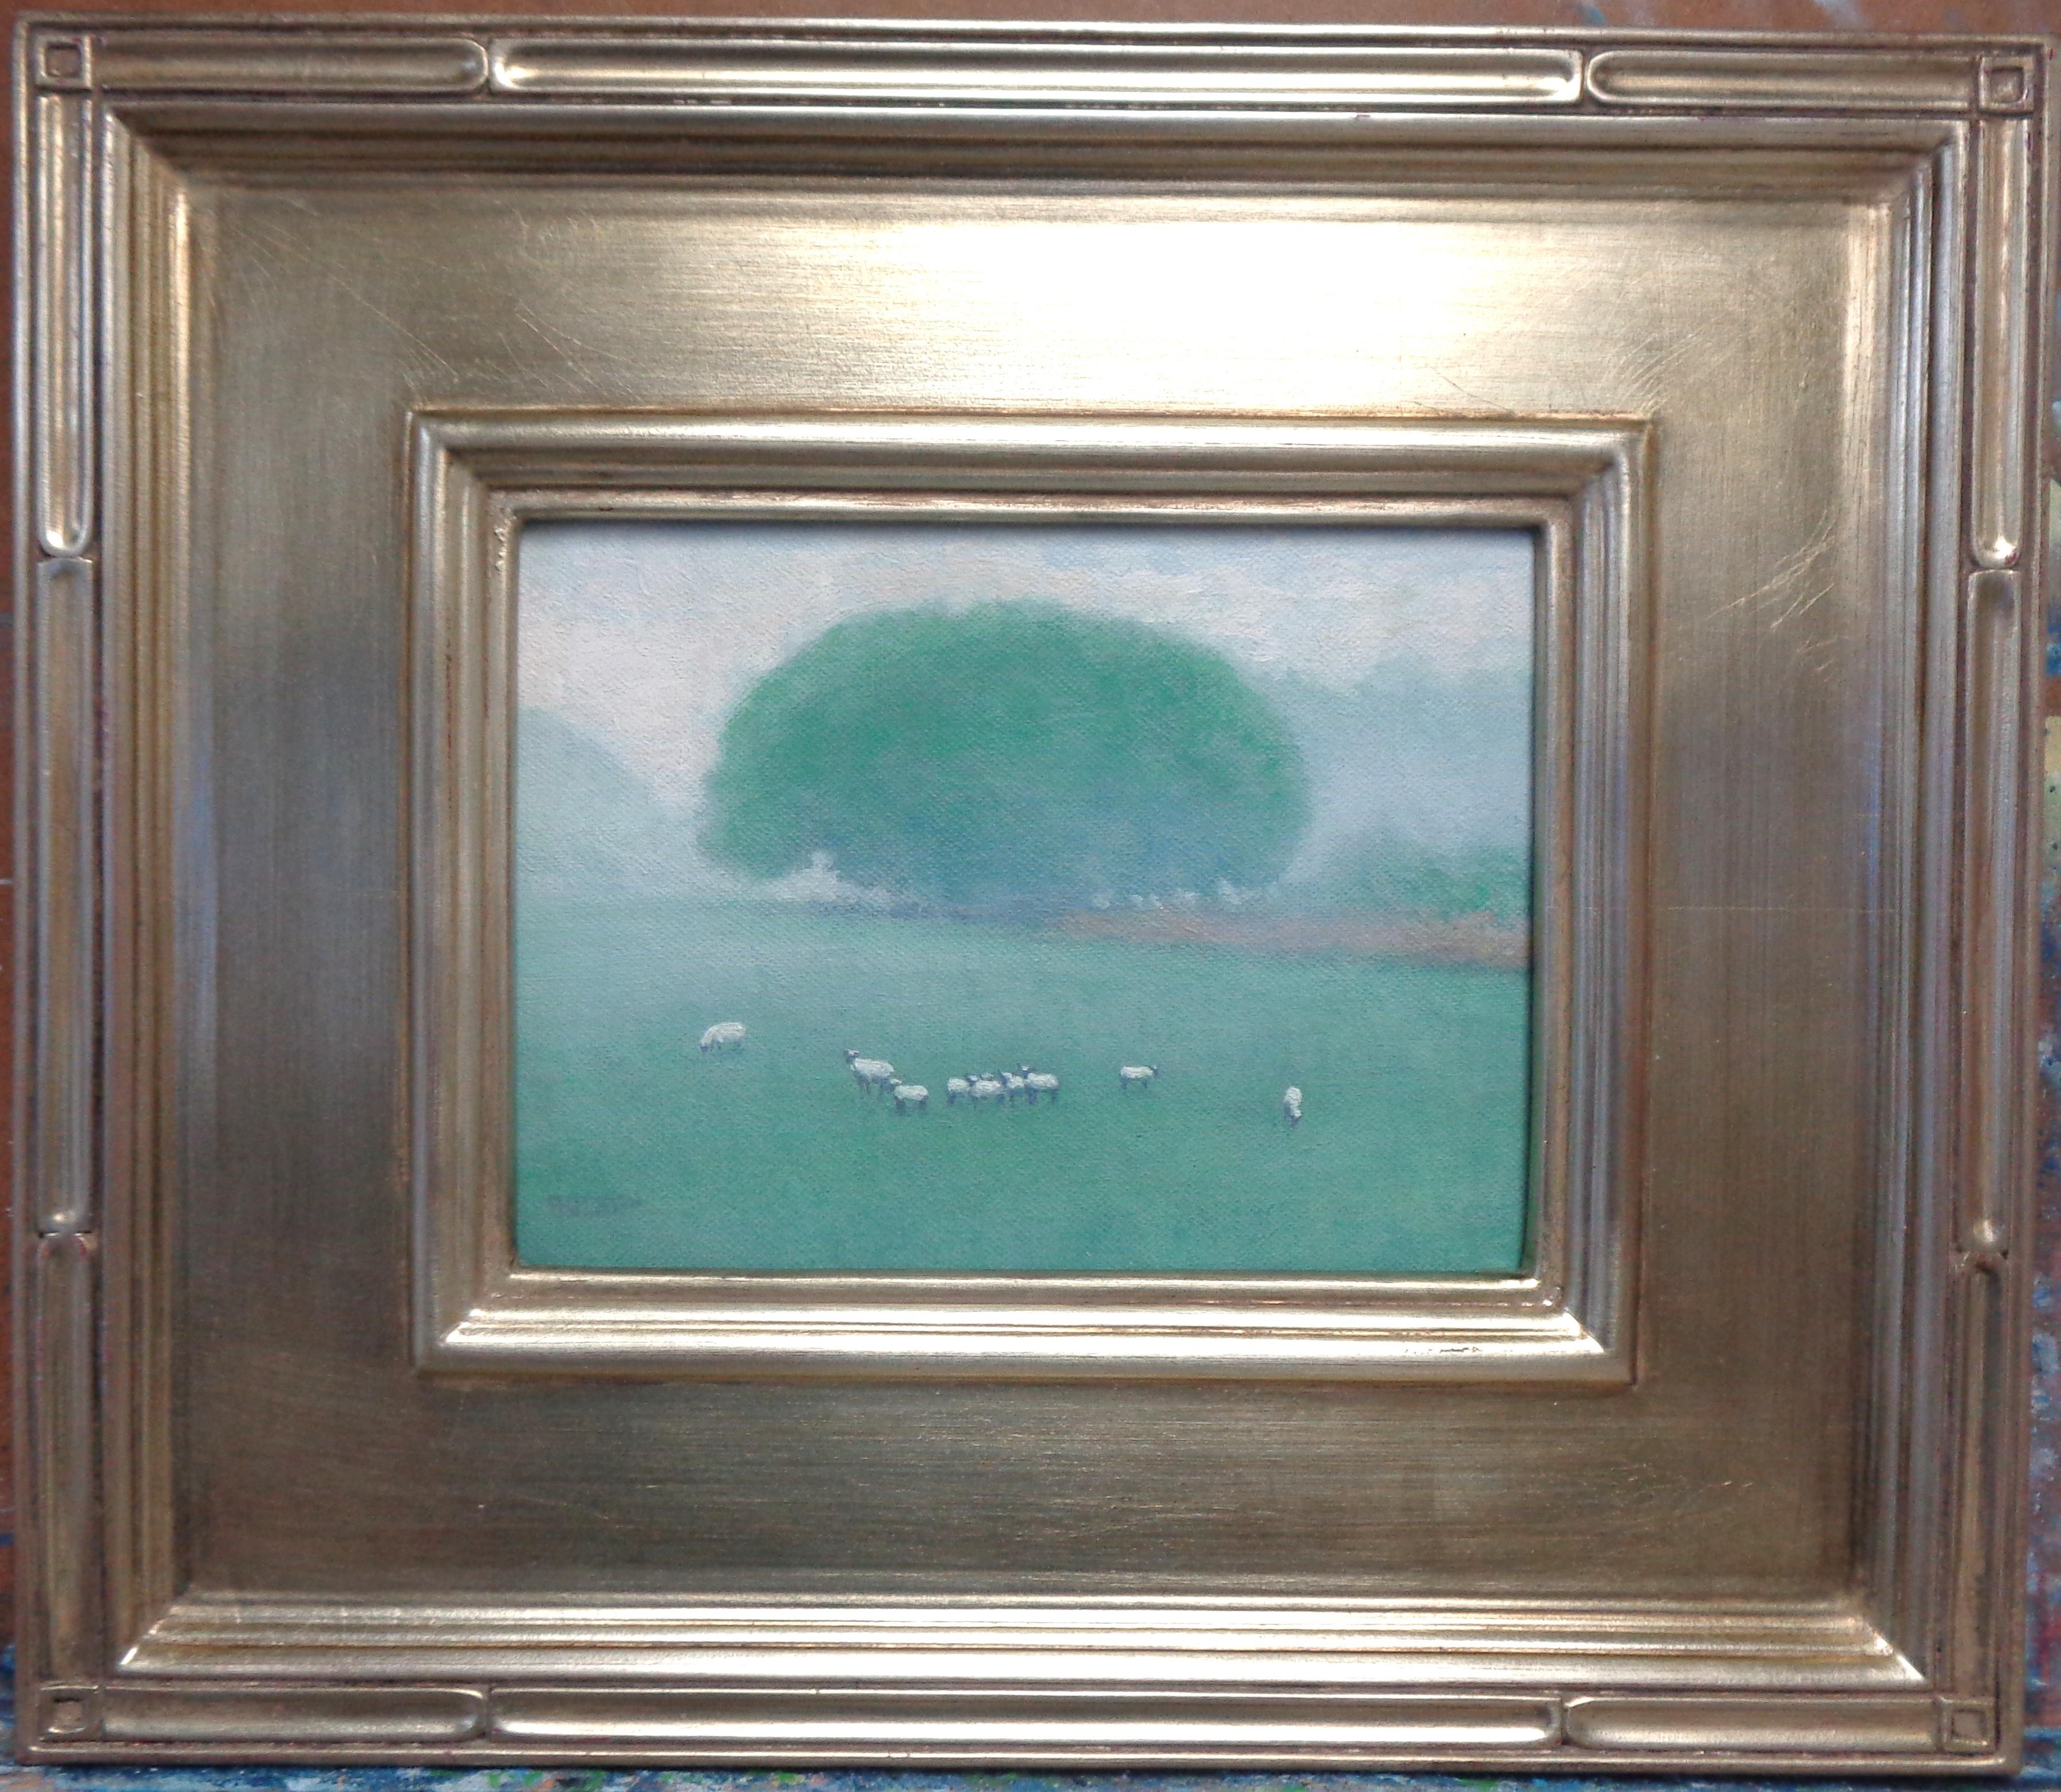  Spring Sheep
oil/panel
6 x 8 unframed, 12 3/8 x 14 1/4 framed is an impressionistic landscape oil painting on canvas panel that showcases a beautiful early spring farm scene near my home where I see these sheep almost everyday. I was attracted to